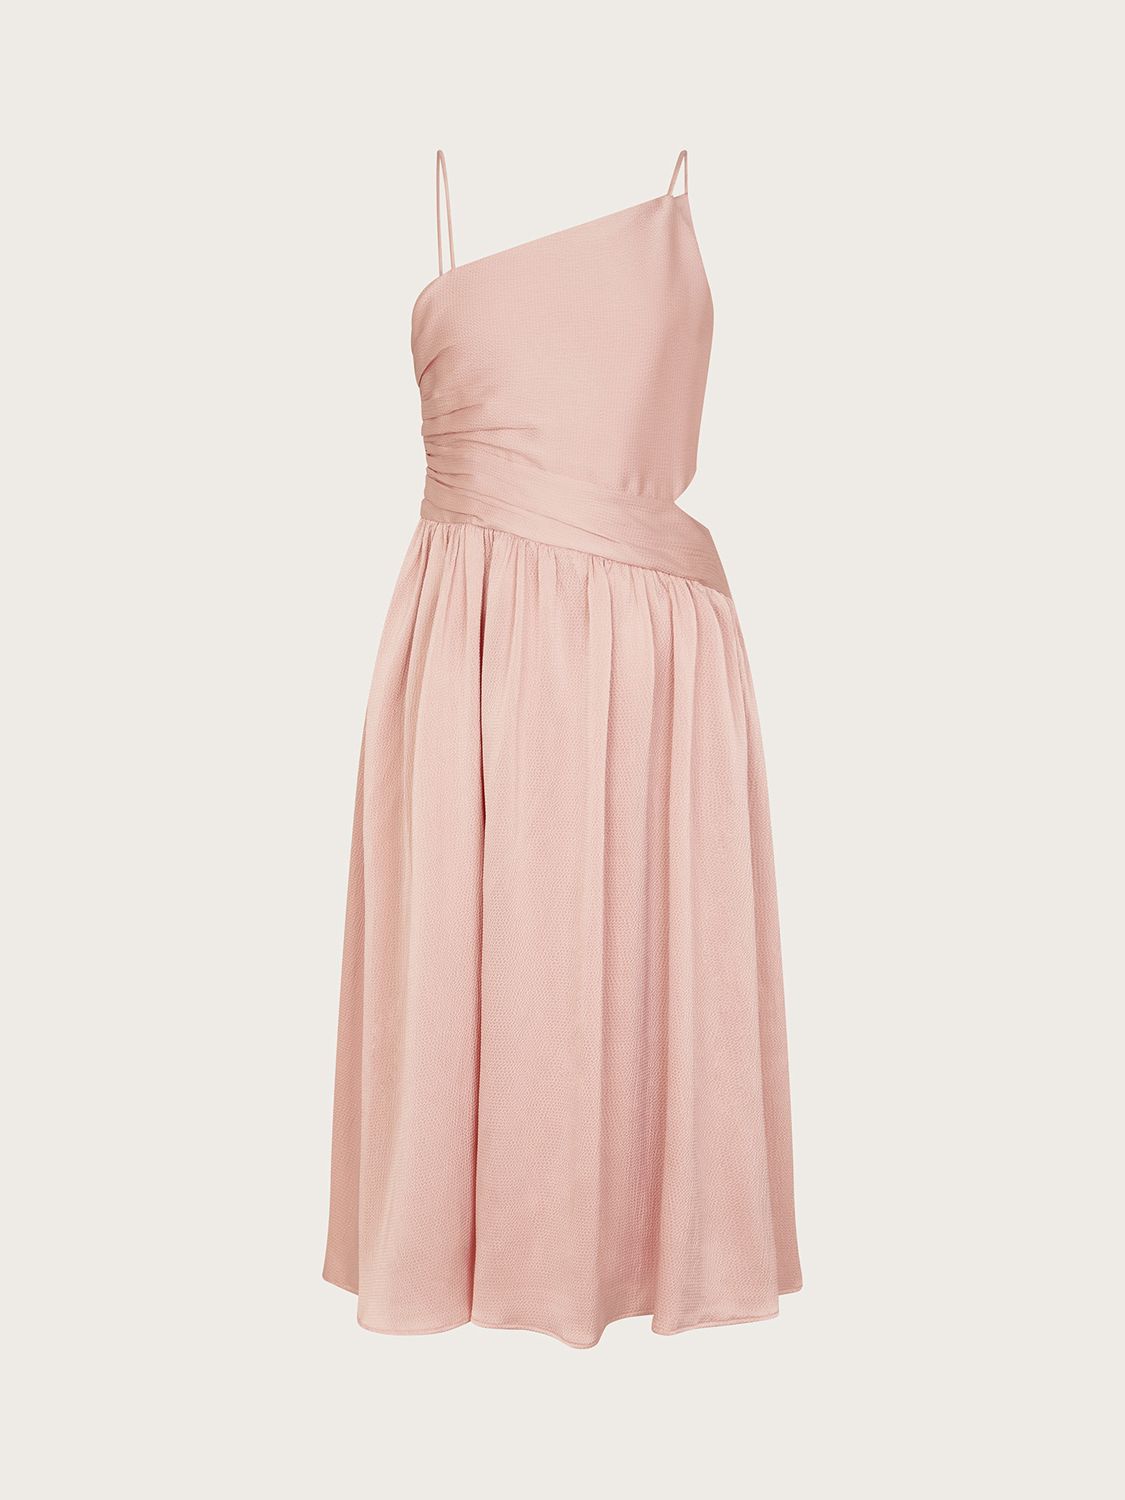 Buy Monsoon Kids' Satin Cut Out Prom Dress Online at johnlewis.com